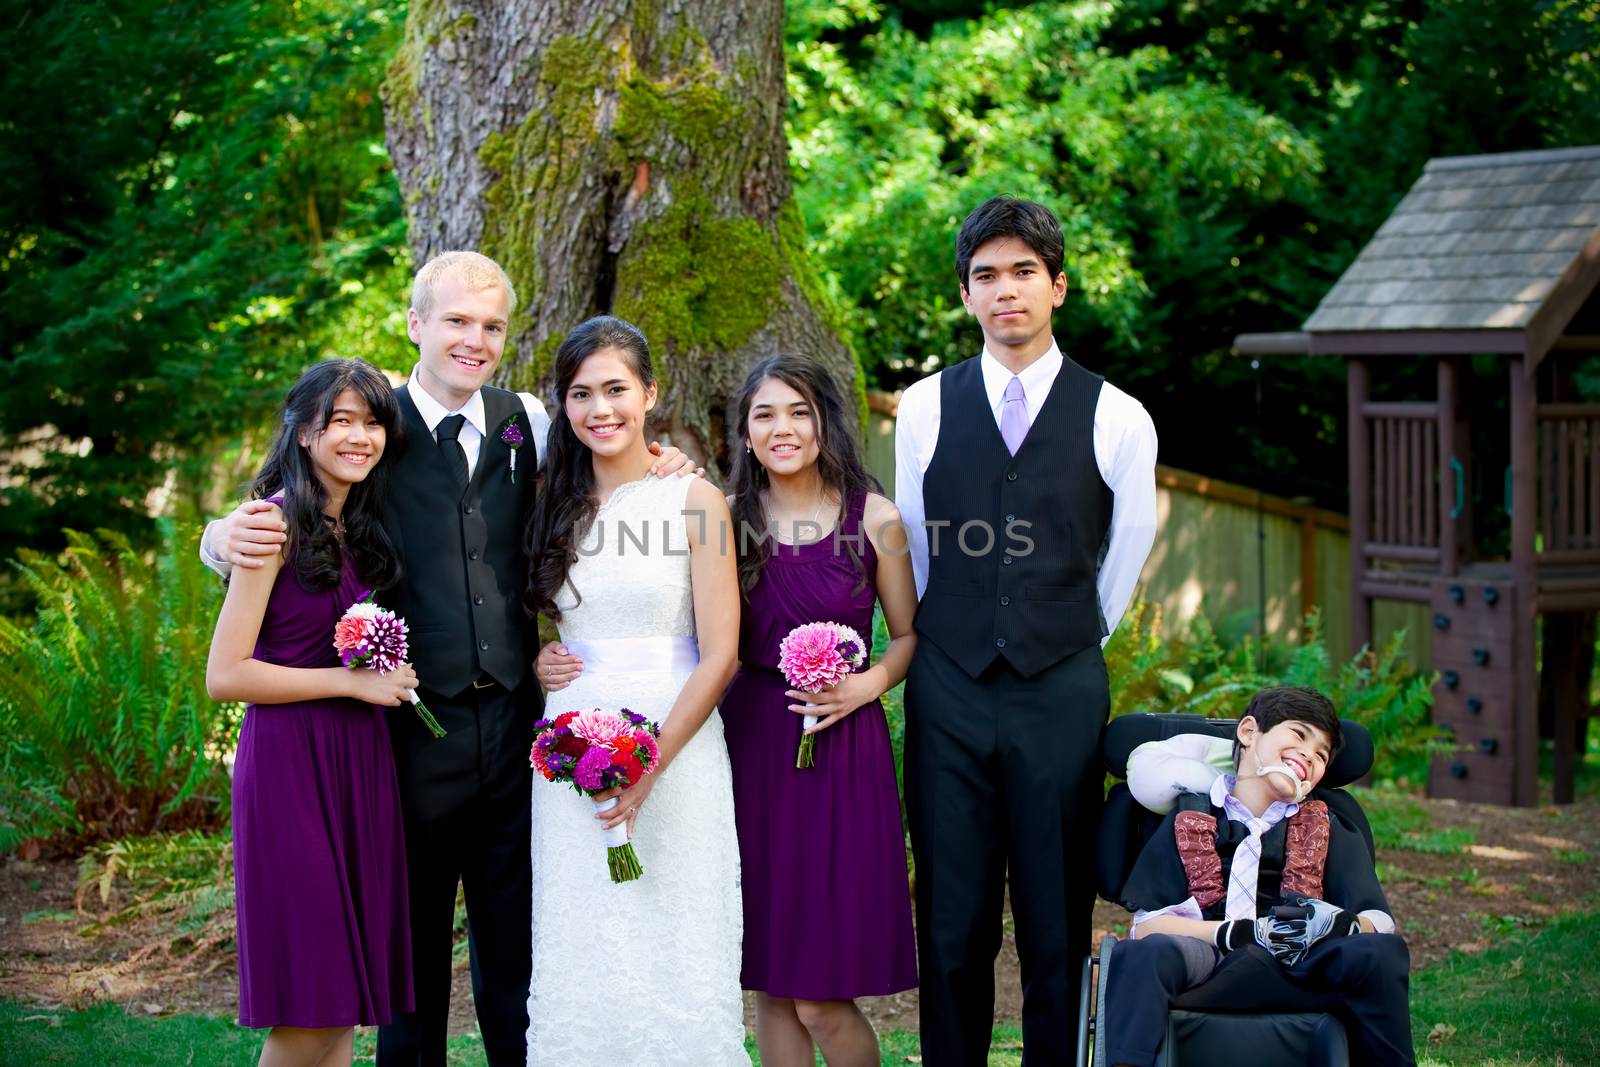 Interracial wedding. Groom standing with his biracial bride's brothers and sisters outdoors. Youngest boy is disabled with cerebral palsy.